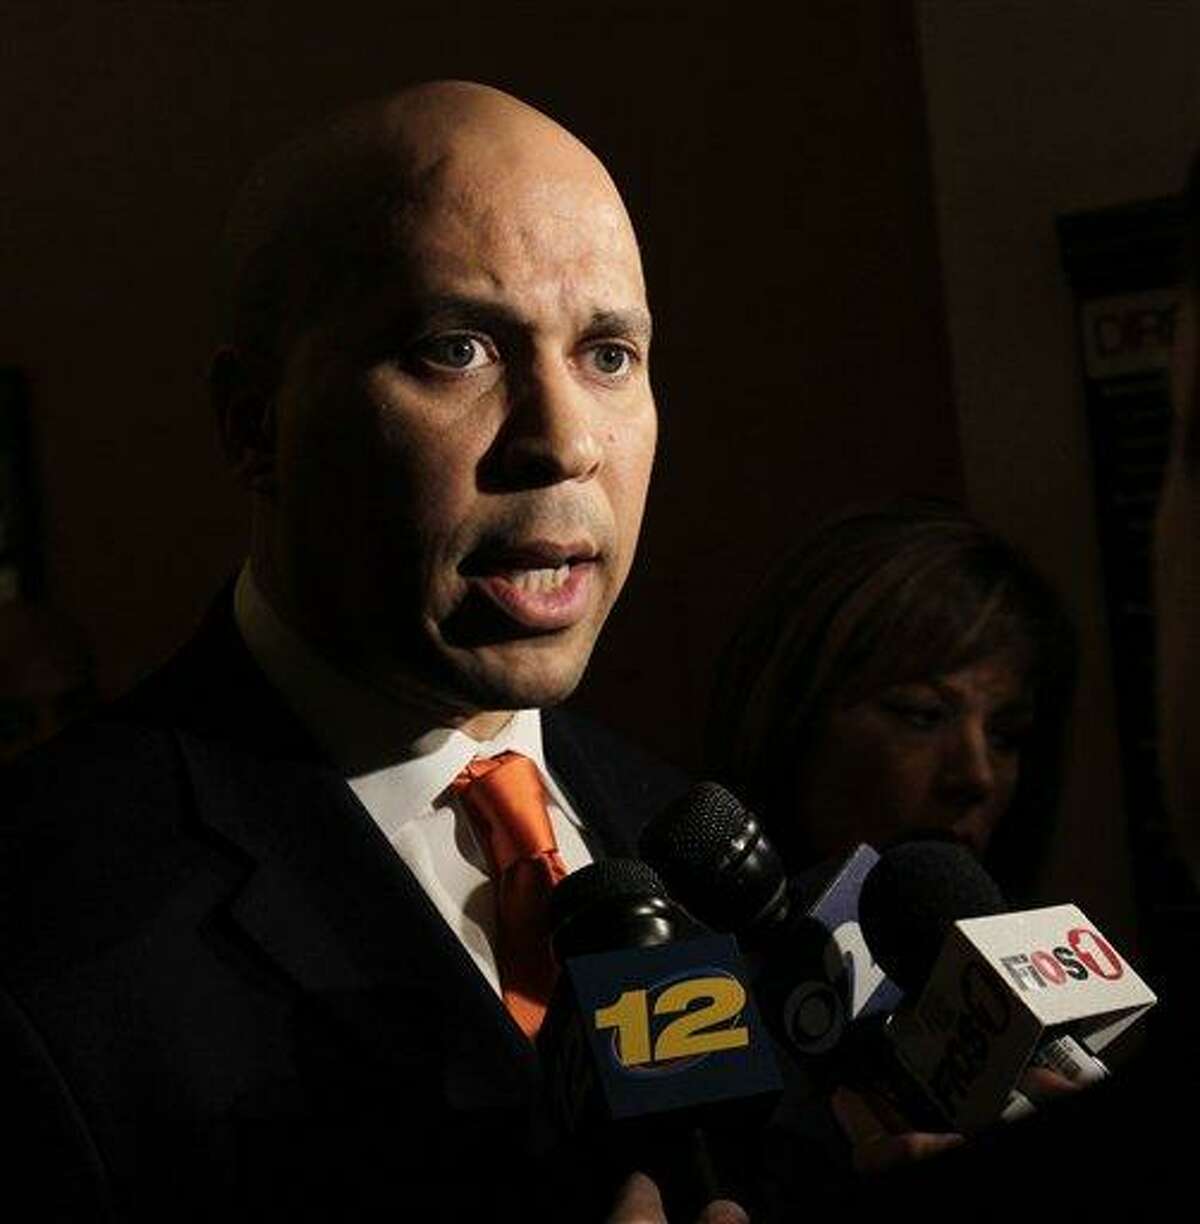 Newark Mayor Corey Booker speaks to the media Feb. 23 about NYPD surveillance activities in Newark before a ceremony at City Hall in Newark, N.J. Outside Washington, the NYPD's efforts drew increased criticism last week, including from Booker, mayor of New Jersey's largest city, who has complained about the NYPD's widespread surveillance there, outside New York's police jurisdiction. Associated Press